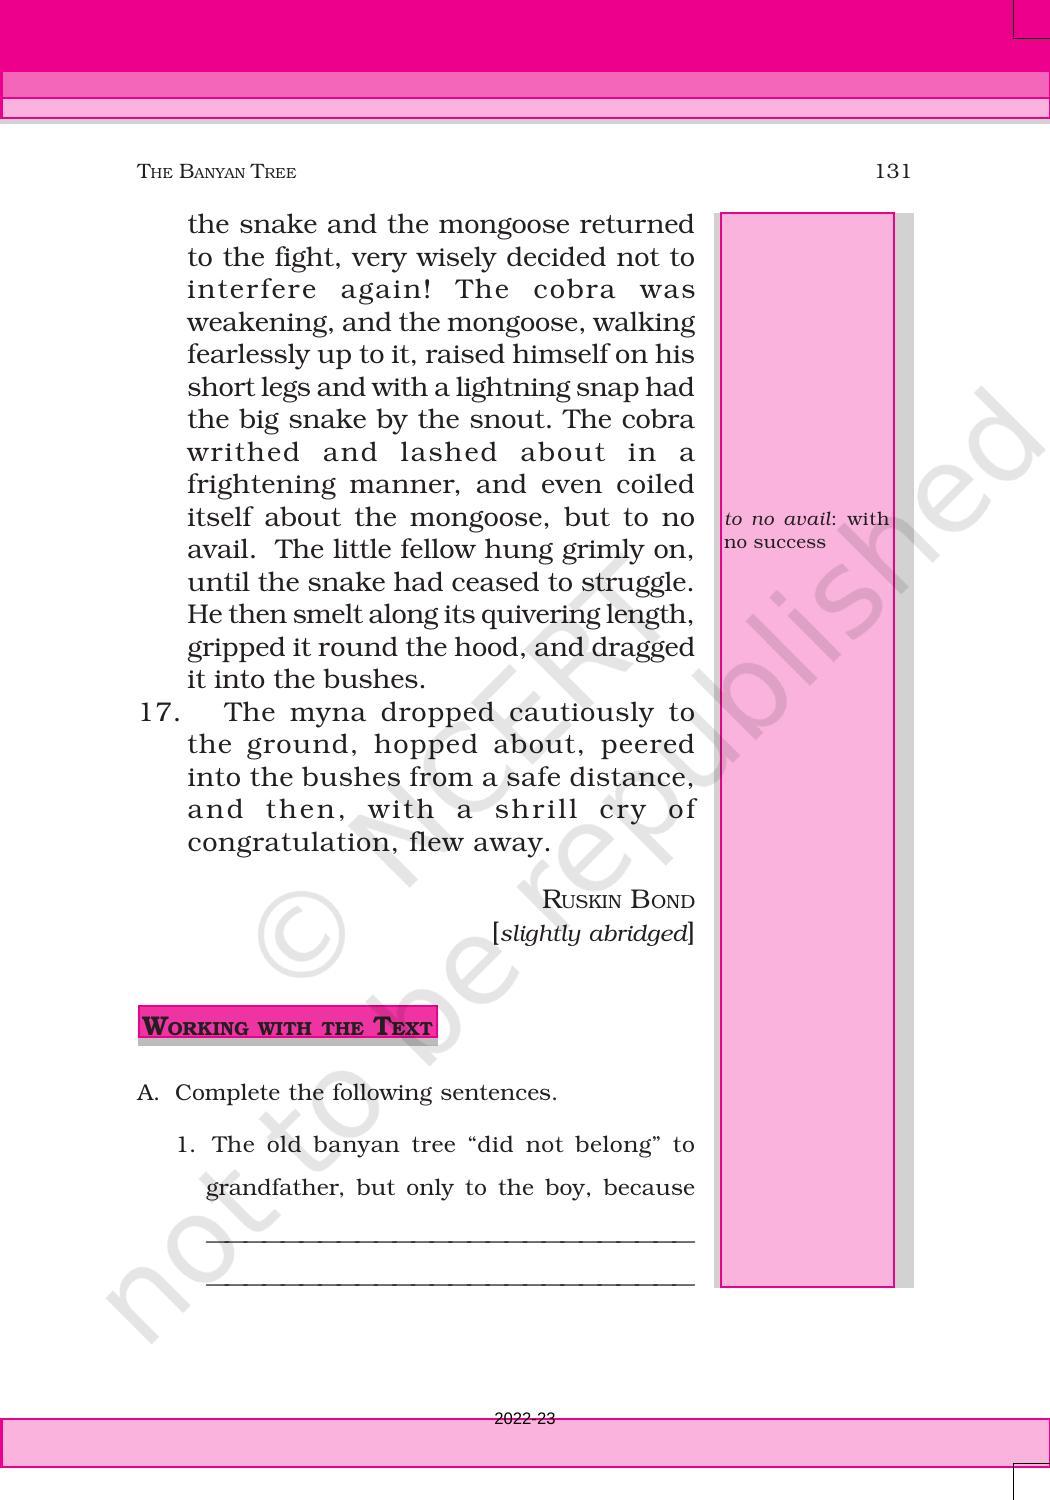 NCERT Book for Class 6 English(Honeysuckle) : Chapter 10-The Banyan Tree - Page 8